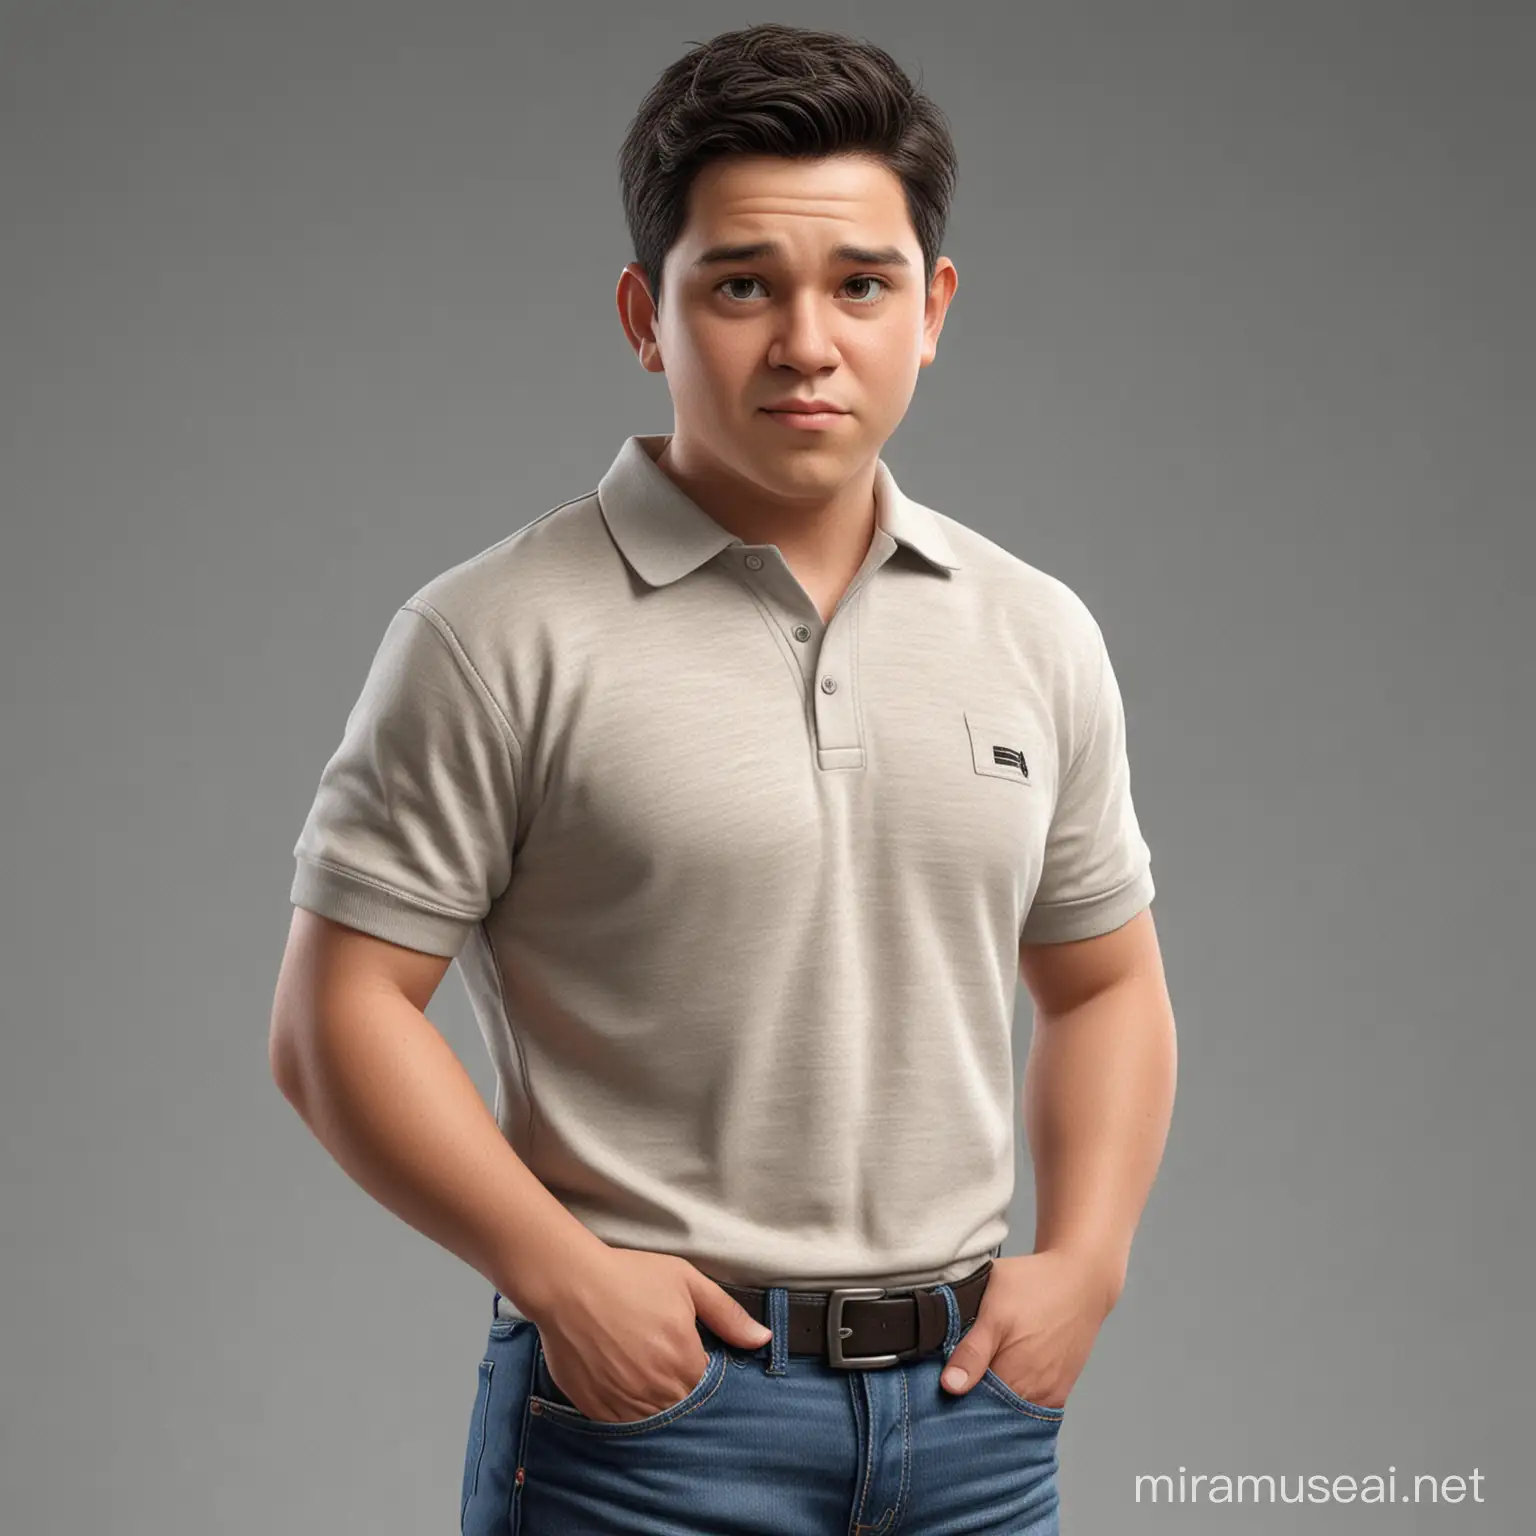 plain background, man, realistic,  little chubby face,looking at the camera, hyperrealism, anatomically correct, textured skin, super detail, award winning, high quality, best quality, black short hair, He wears a light polo shirt. wear sneaker and jeans,full body